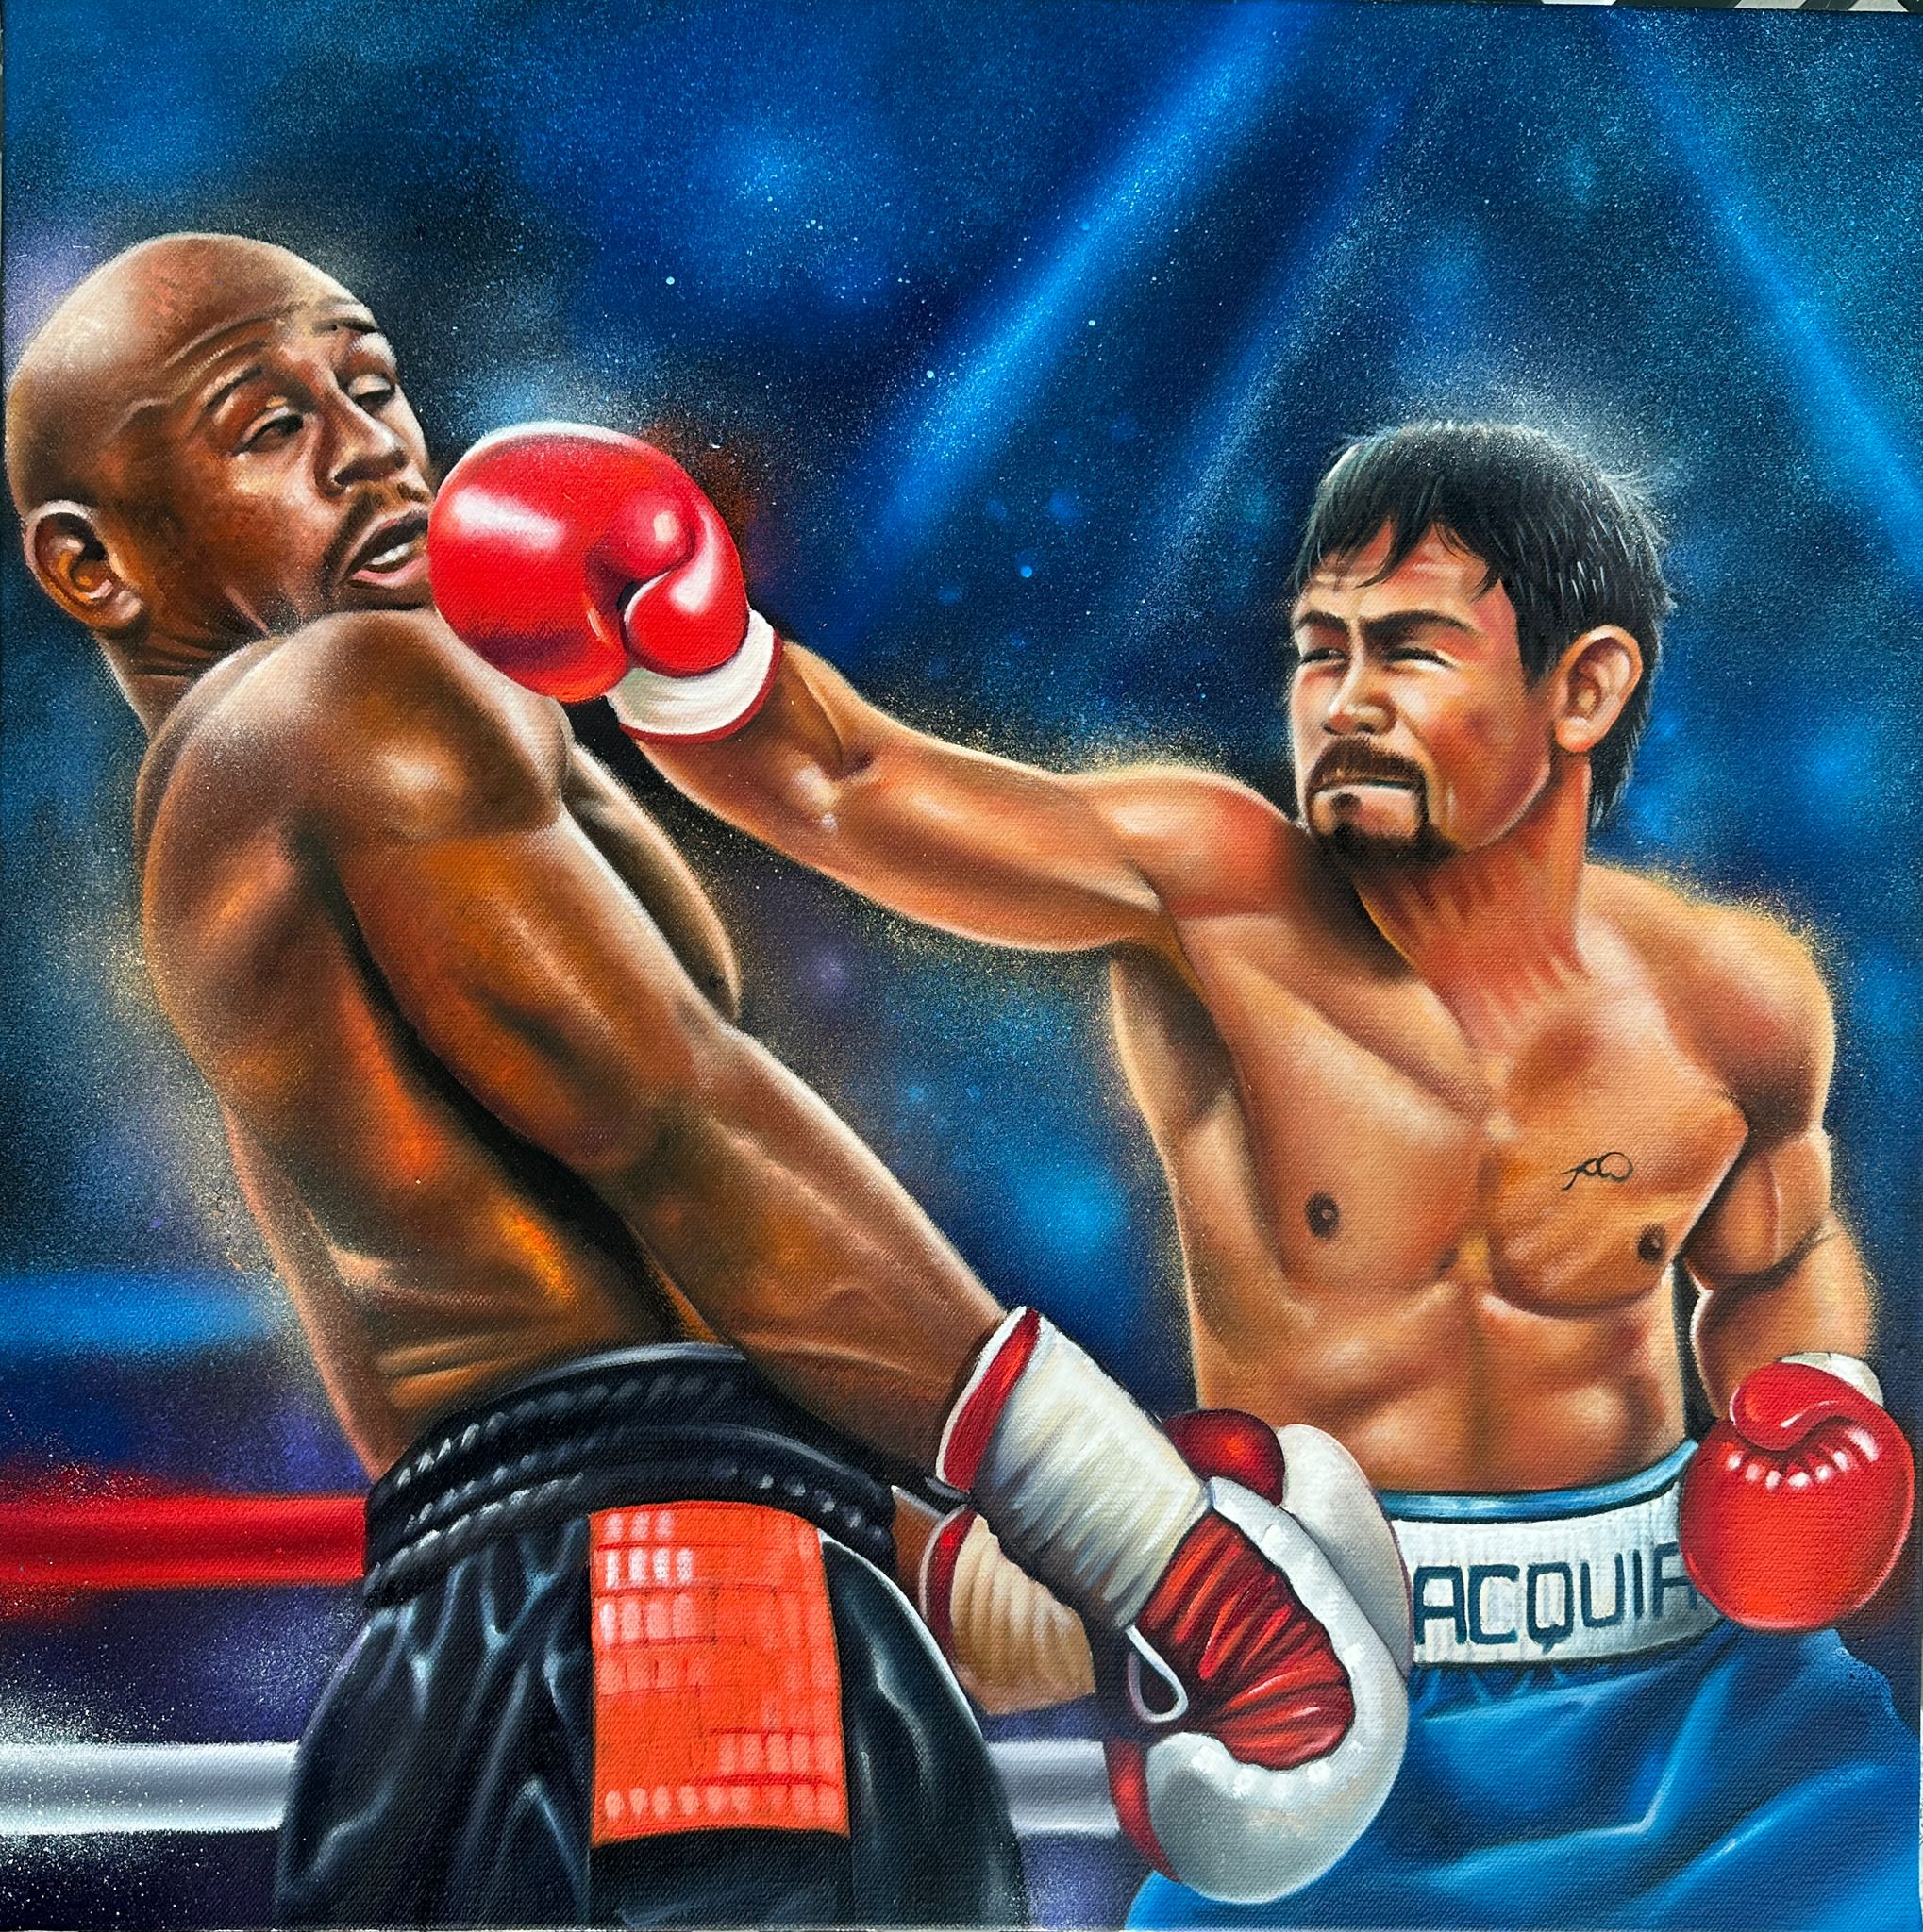 Painting, Studio Fine Art Gallery @ Affordable Art Fair, Jayaraman Kalidass, Pound for pound fighters